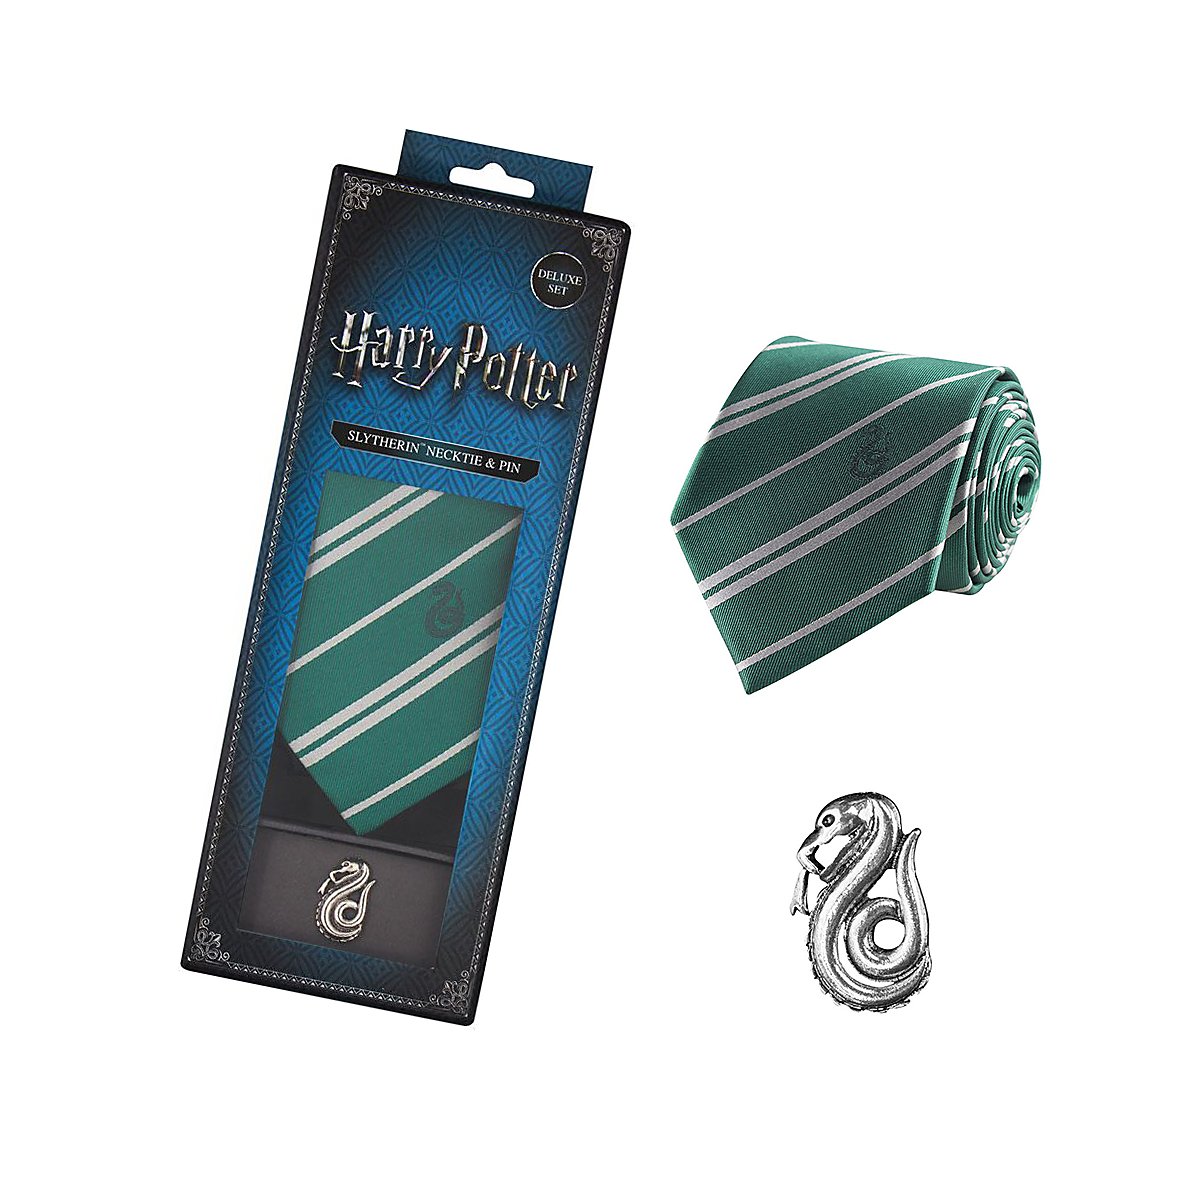 Metal Magic Wand Display - Slytherin - Boutique Harry Potter